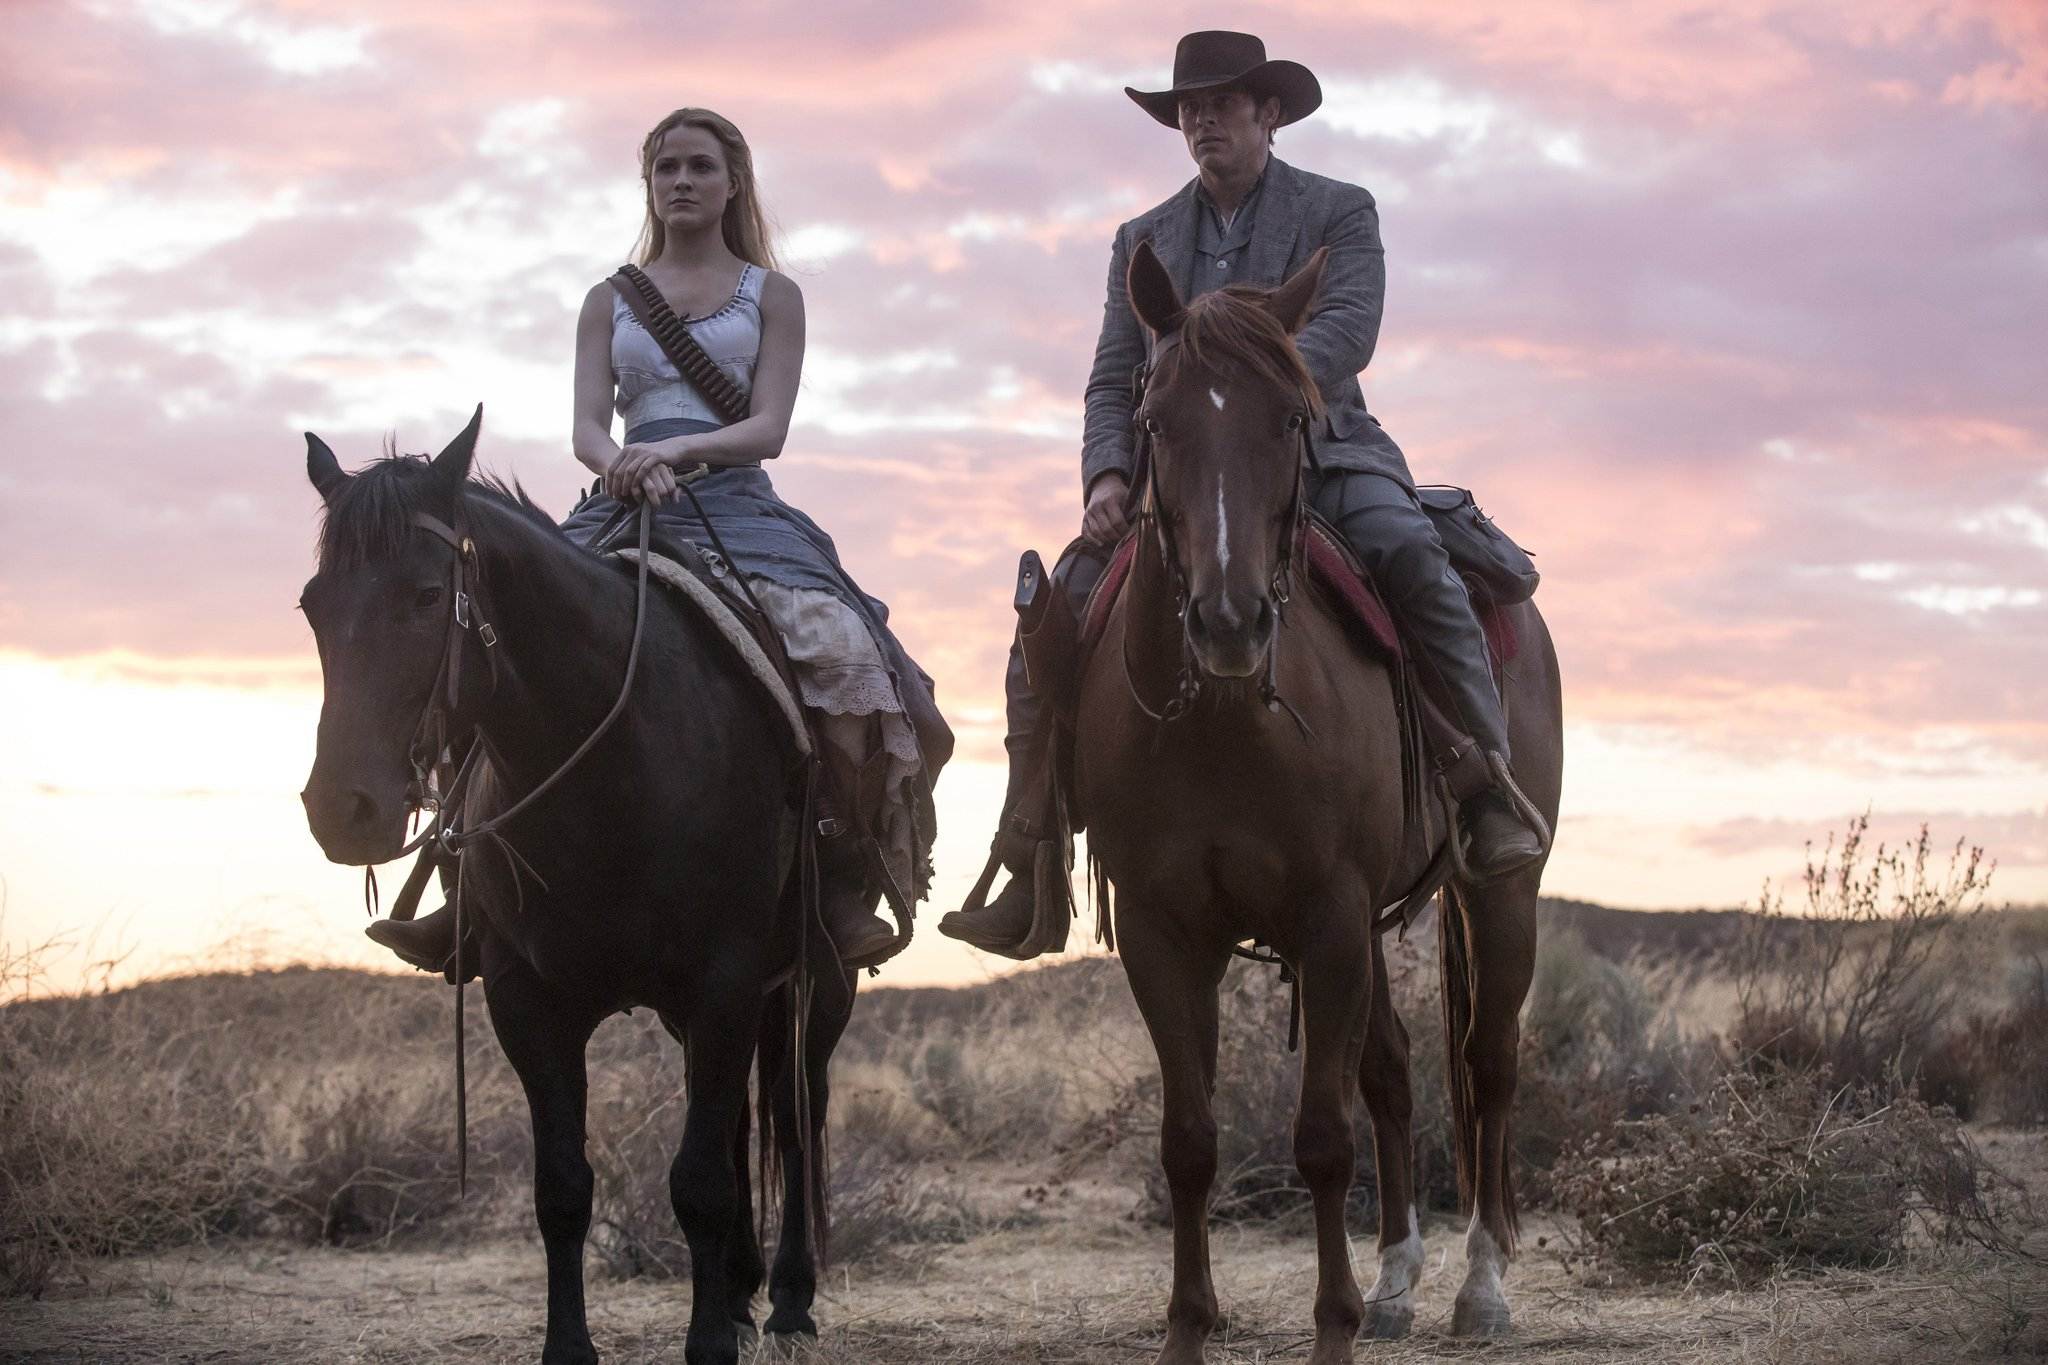 evan rachel wood will finally be paid the same amount as her male costars on westworld